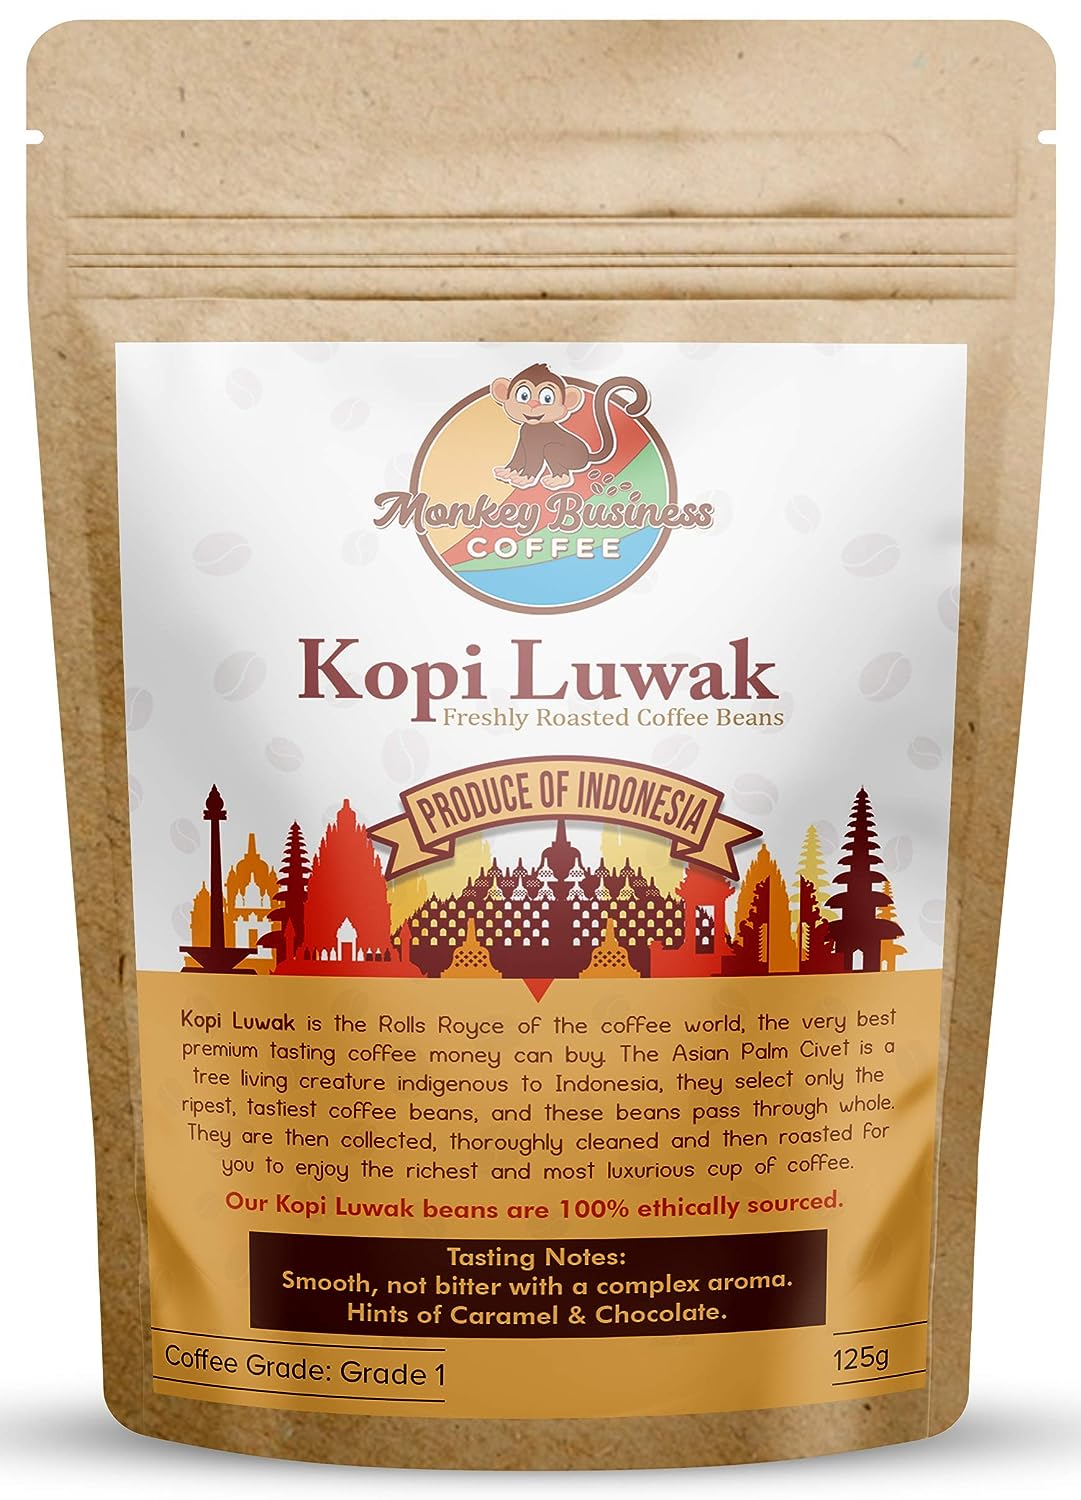 Monkey Business Coffee - Wild Kopi Luwak Coffee Ground Beans - Ethically Sourced - Other Weights & Bean Types Available) - Produce of Indonesia